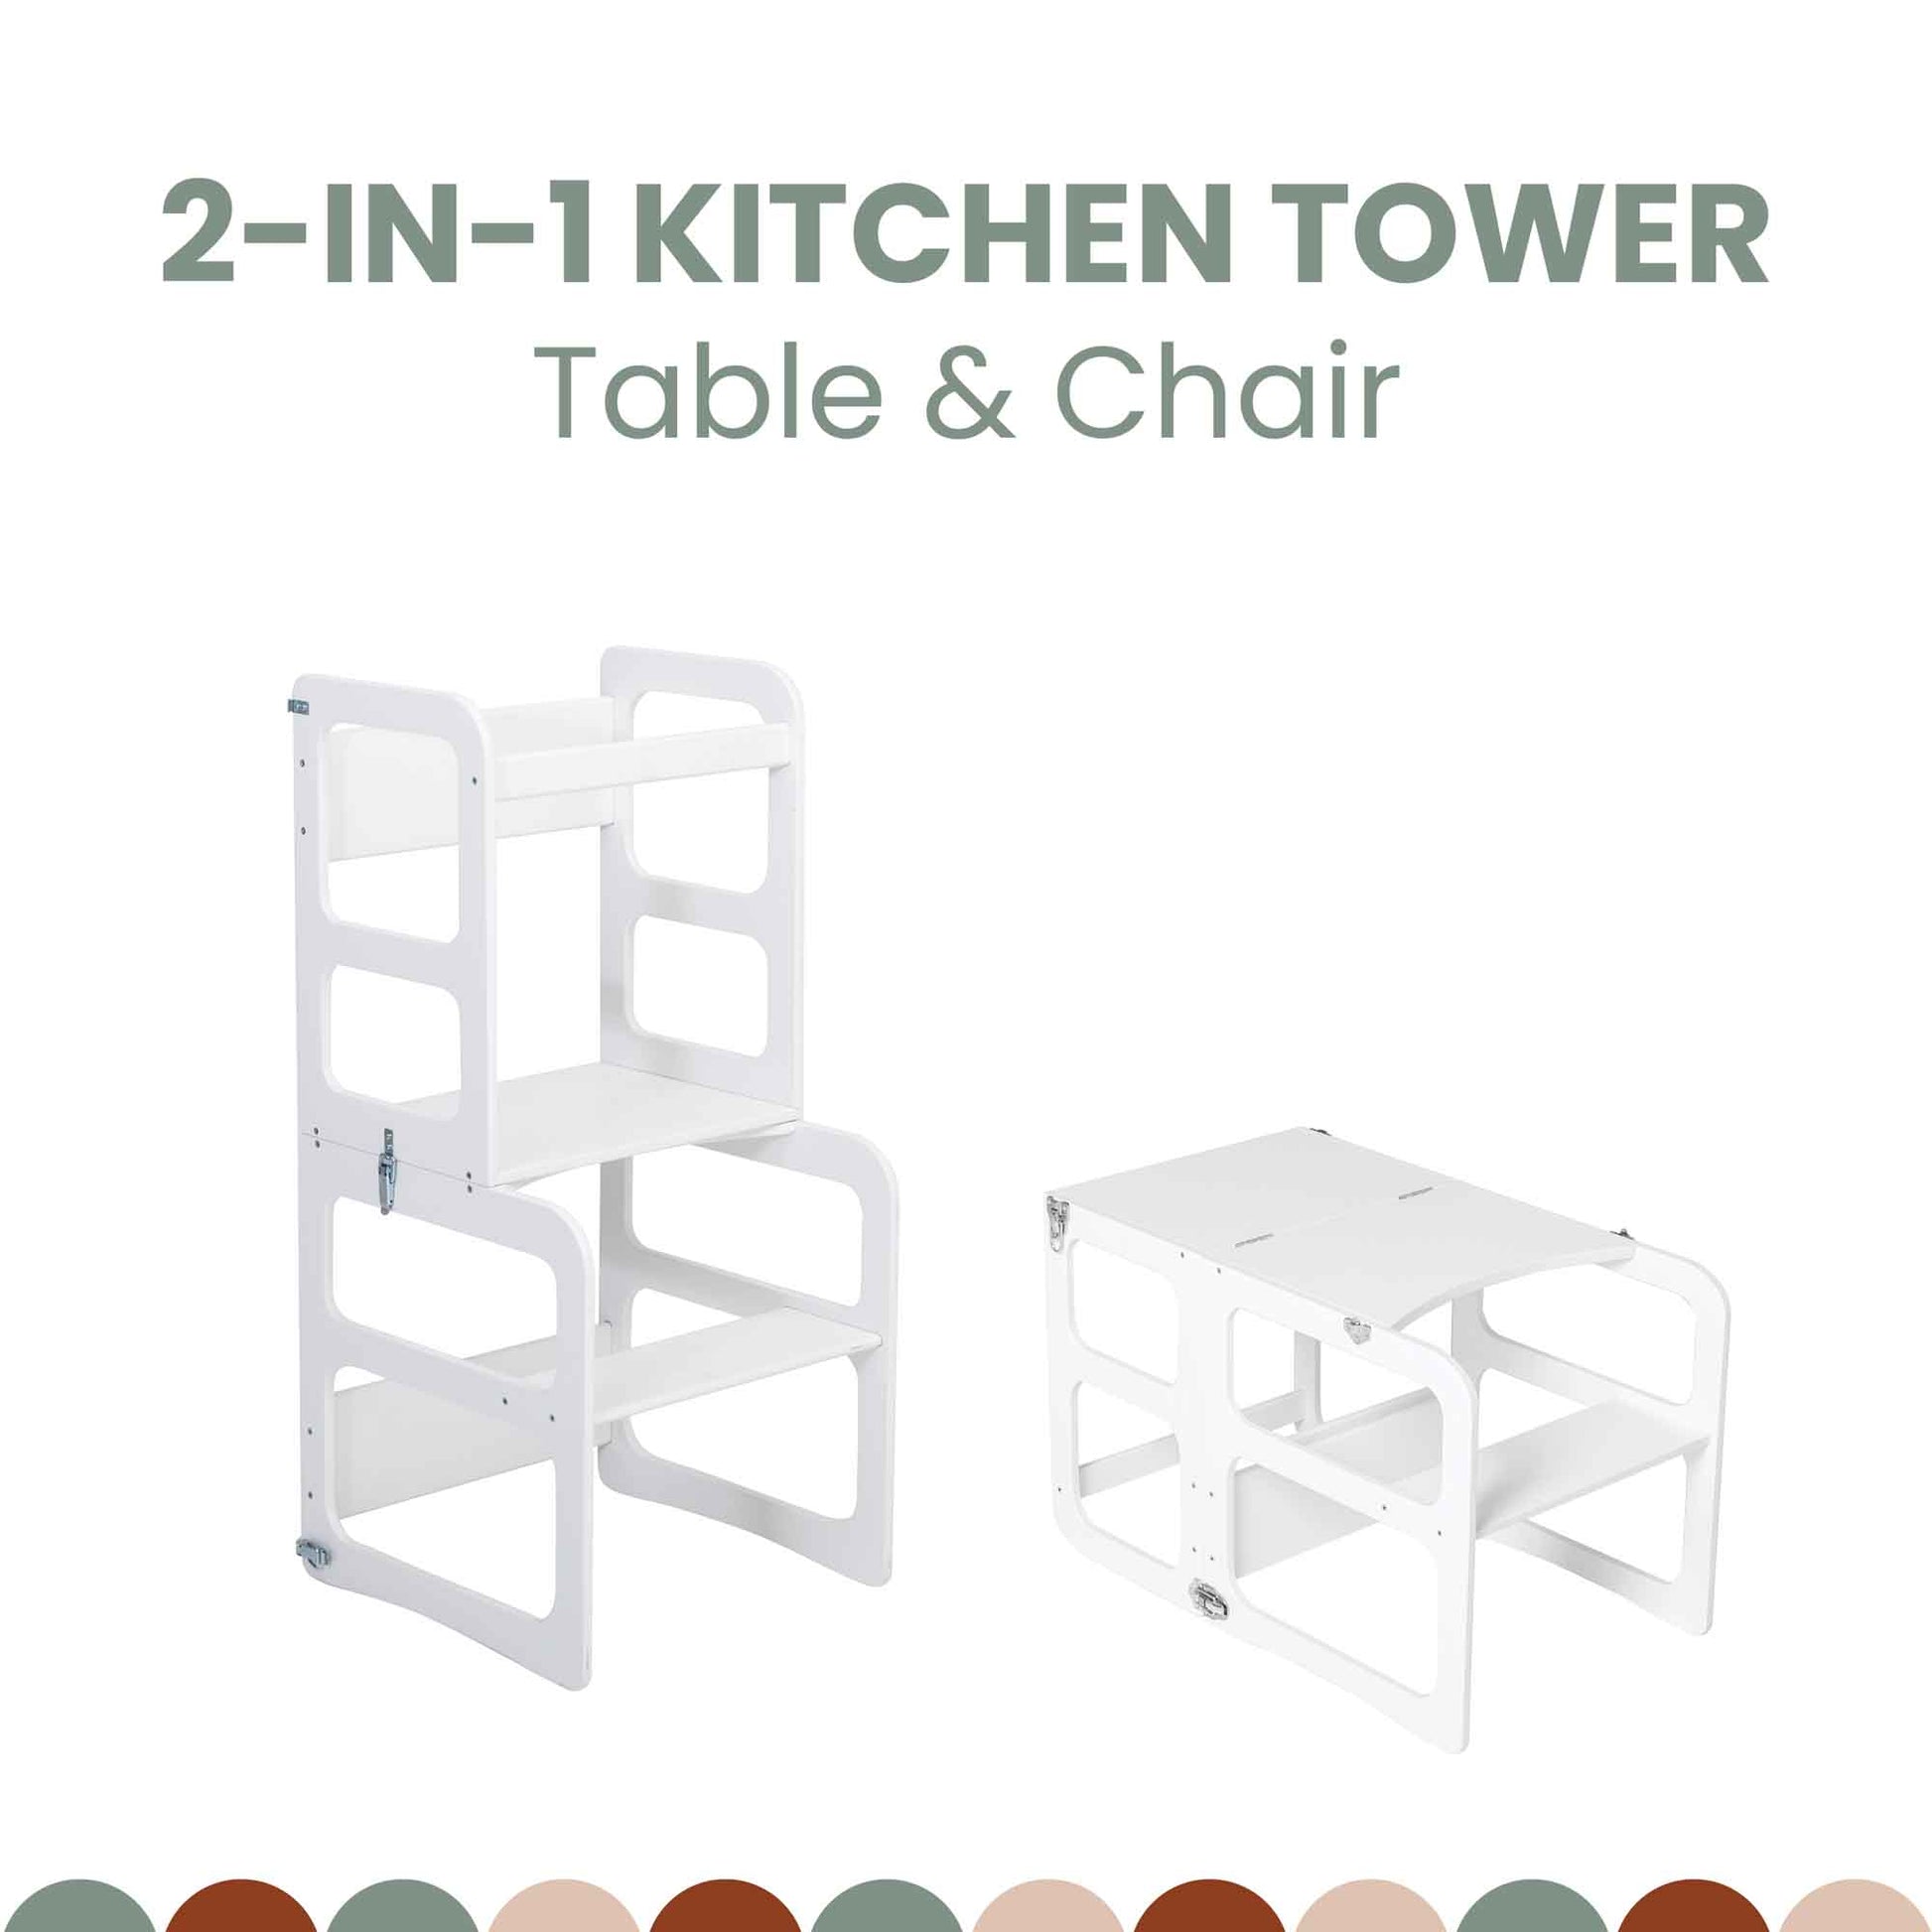 Here is an image of the 2-in-1 Transformable Kitchen Tower - Table and Chair Set that can easily be converted into either a table and chair set or used as a Montessori helper tower to support your young chef in the kitchen. Both the tower and the chair/table feature a white, modern, minimalist design.